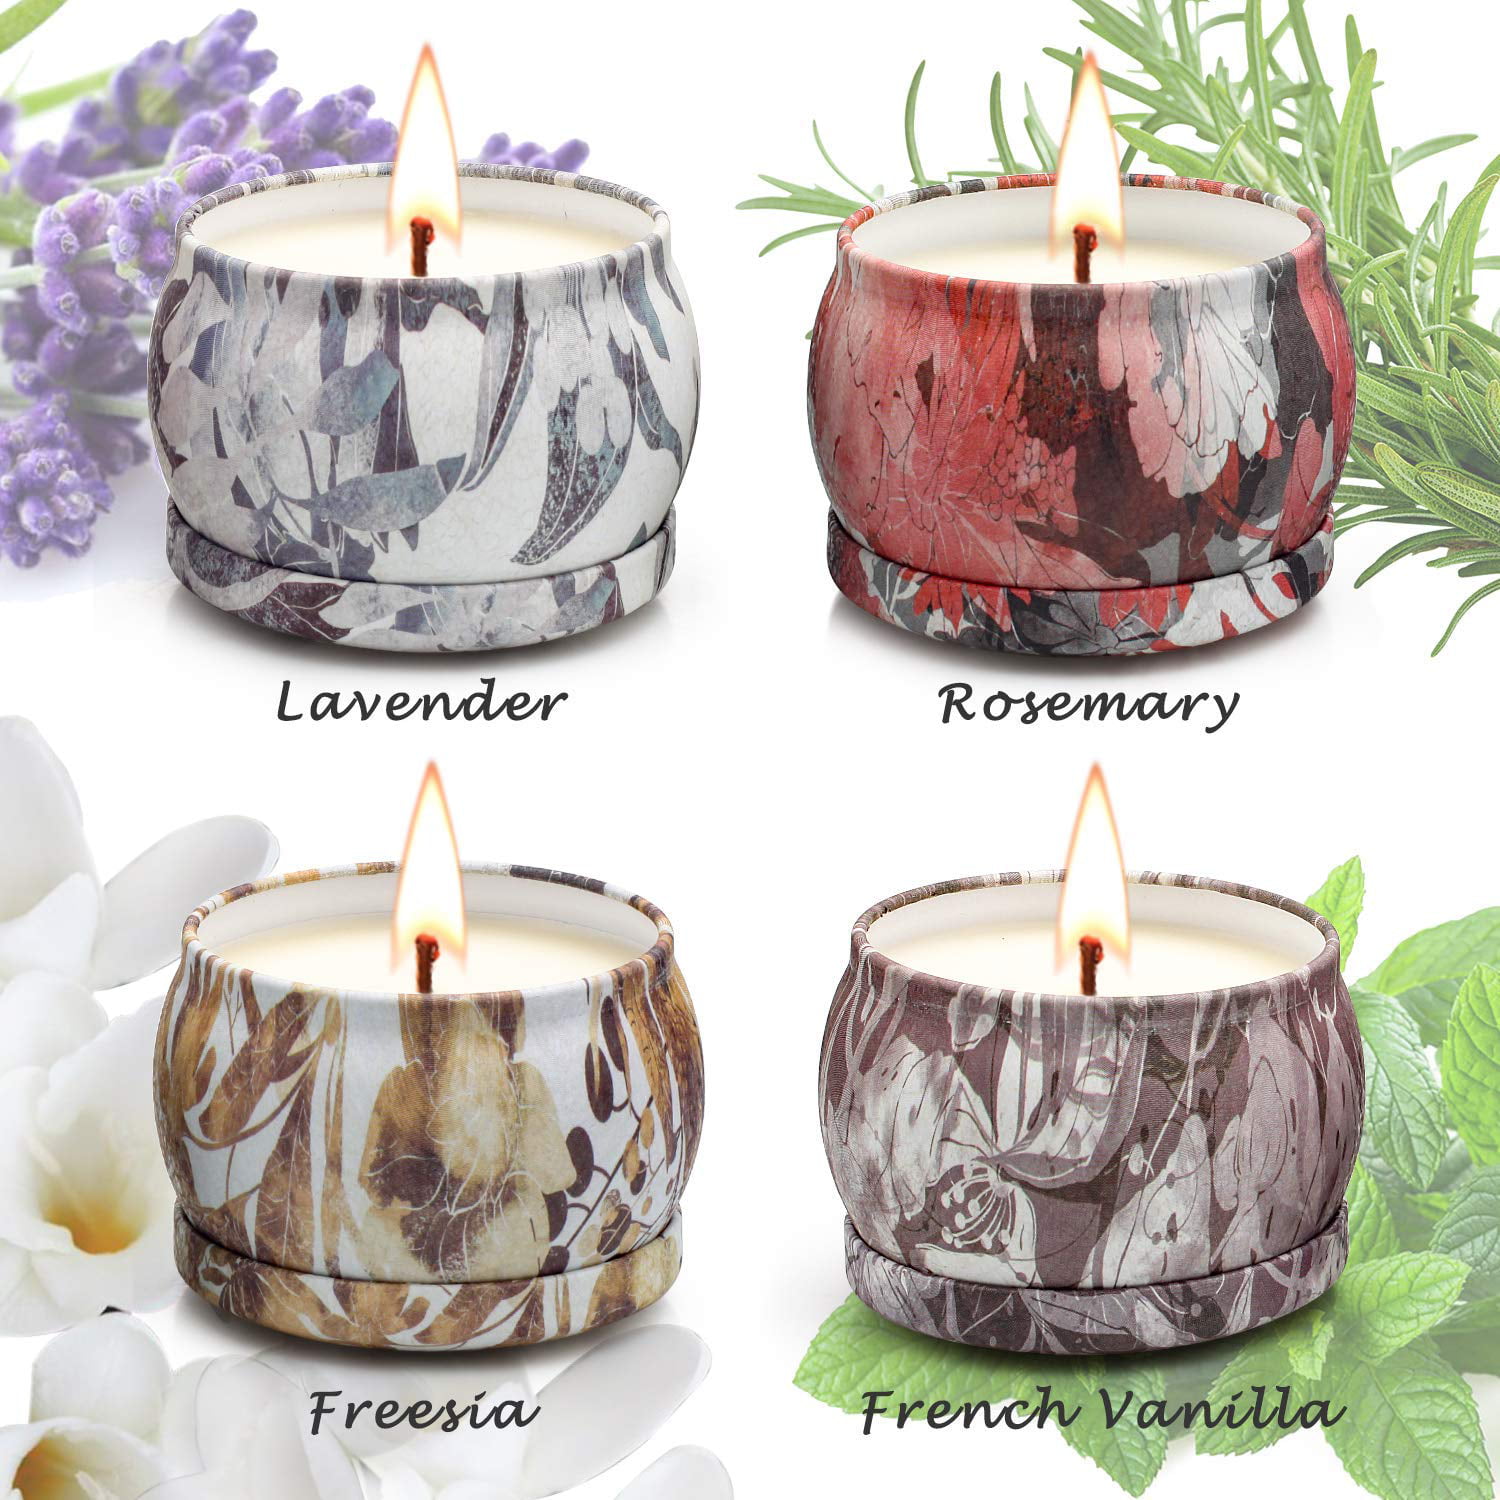 Gifts for Birthday Valentines Day Mothers Day Anniversary Thanksgiving Christmas etc. Gifts for Women Scented Candles Set for Home Stress Relief